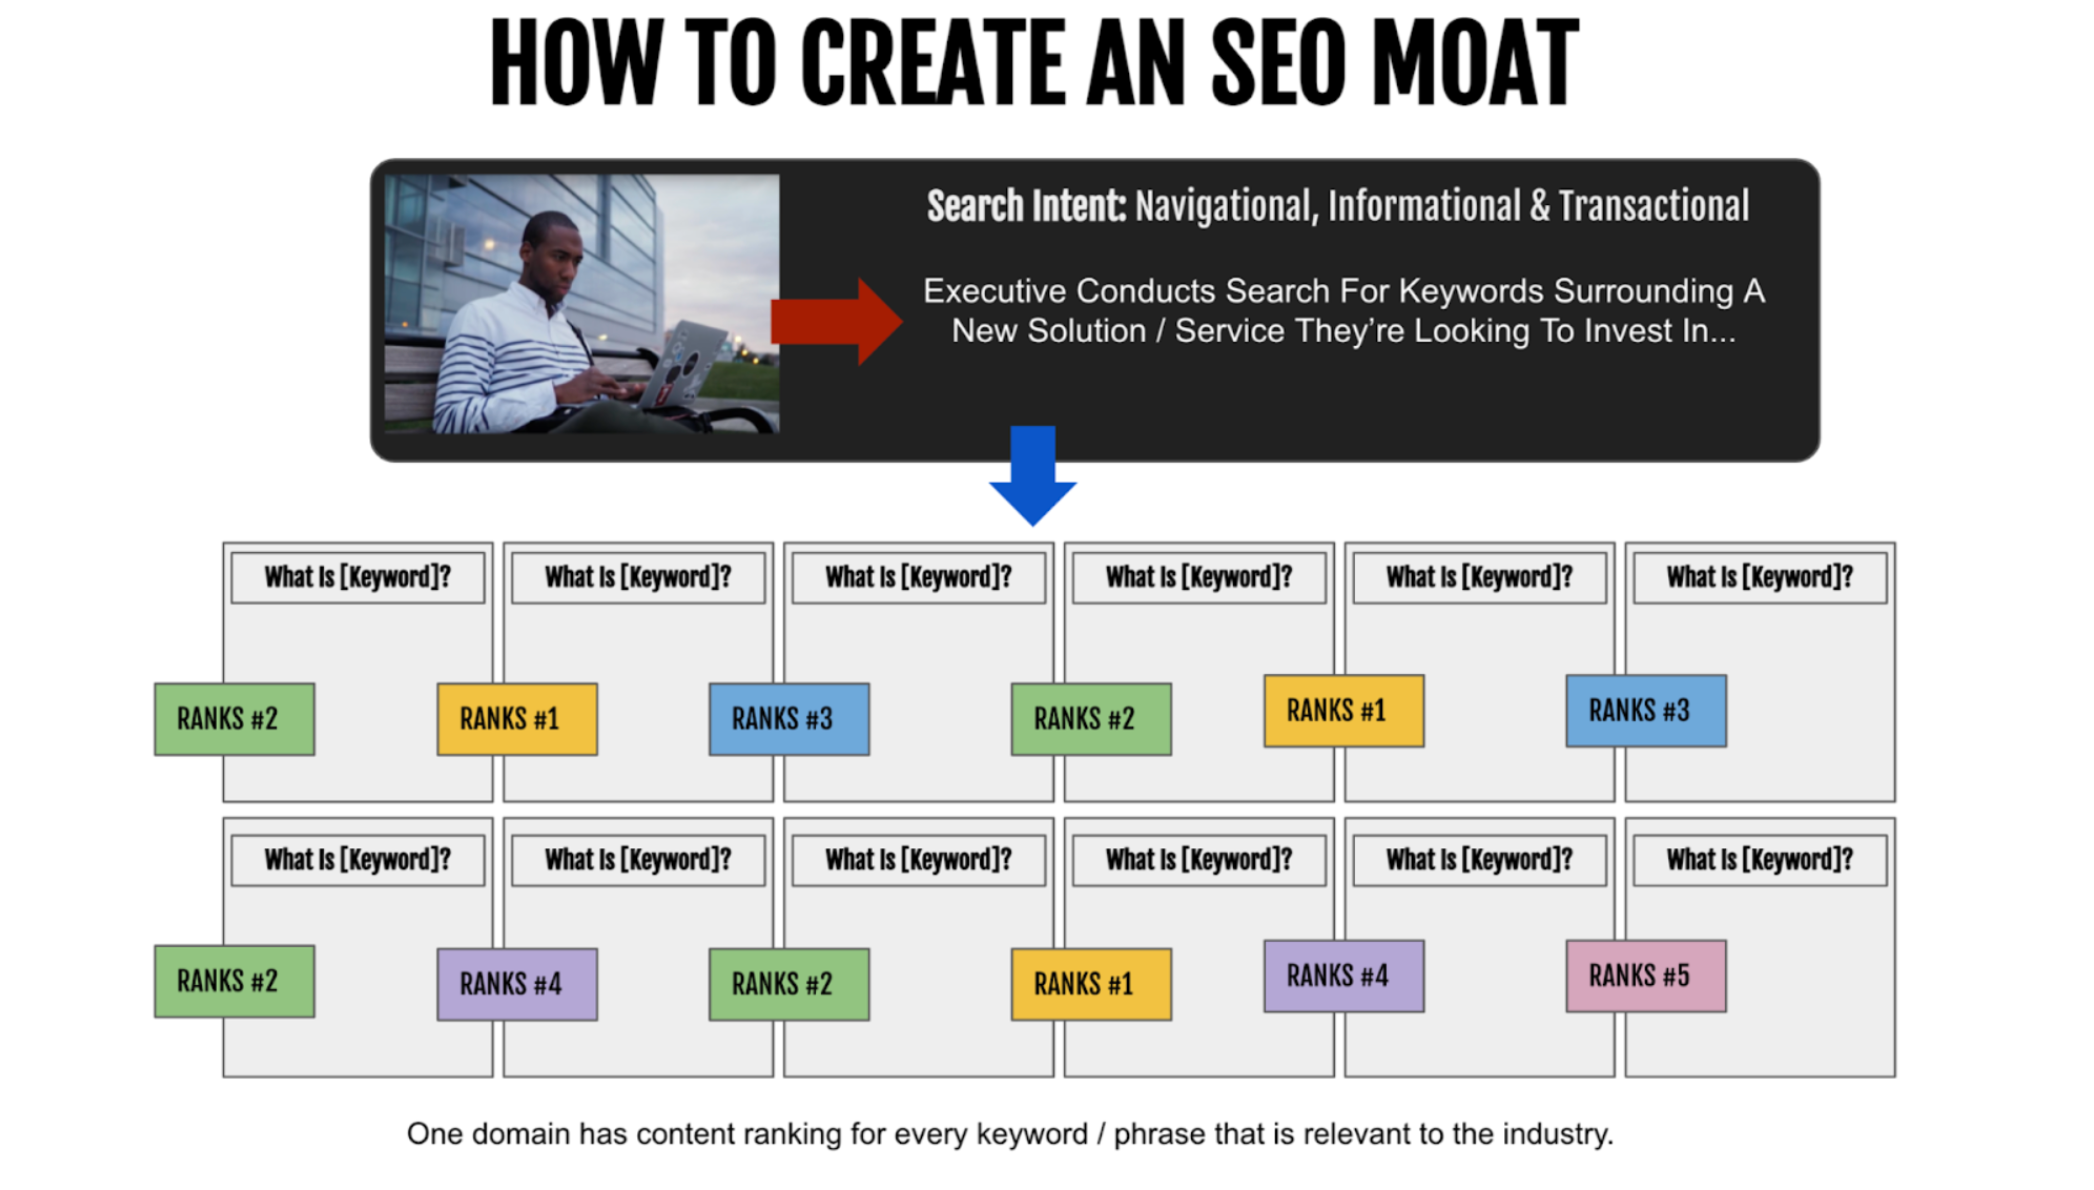 How To Create An SEO Moat